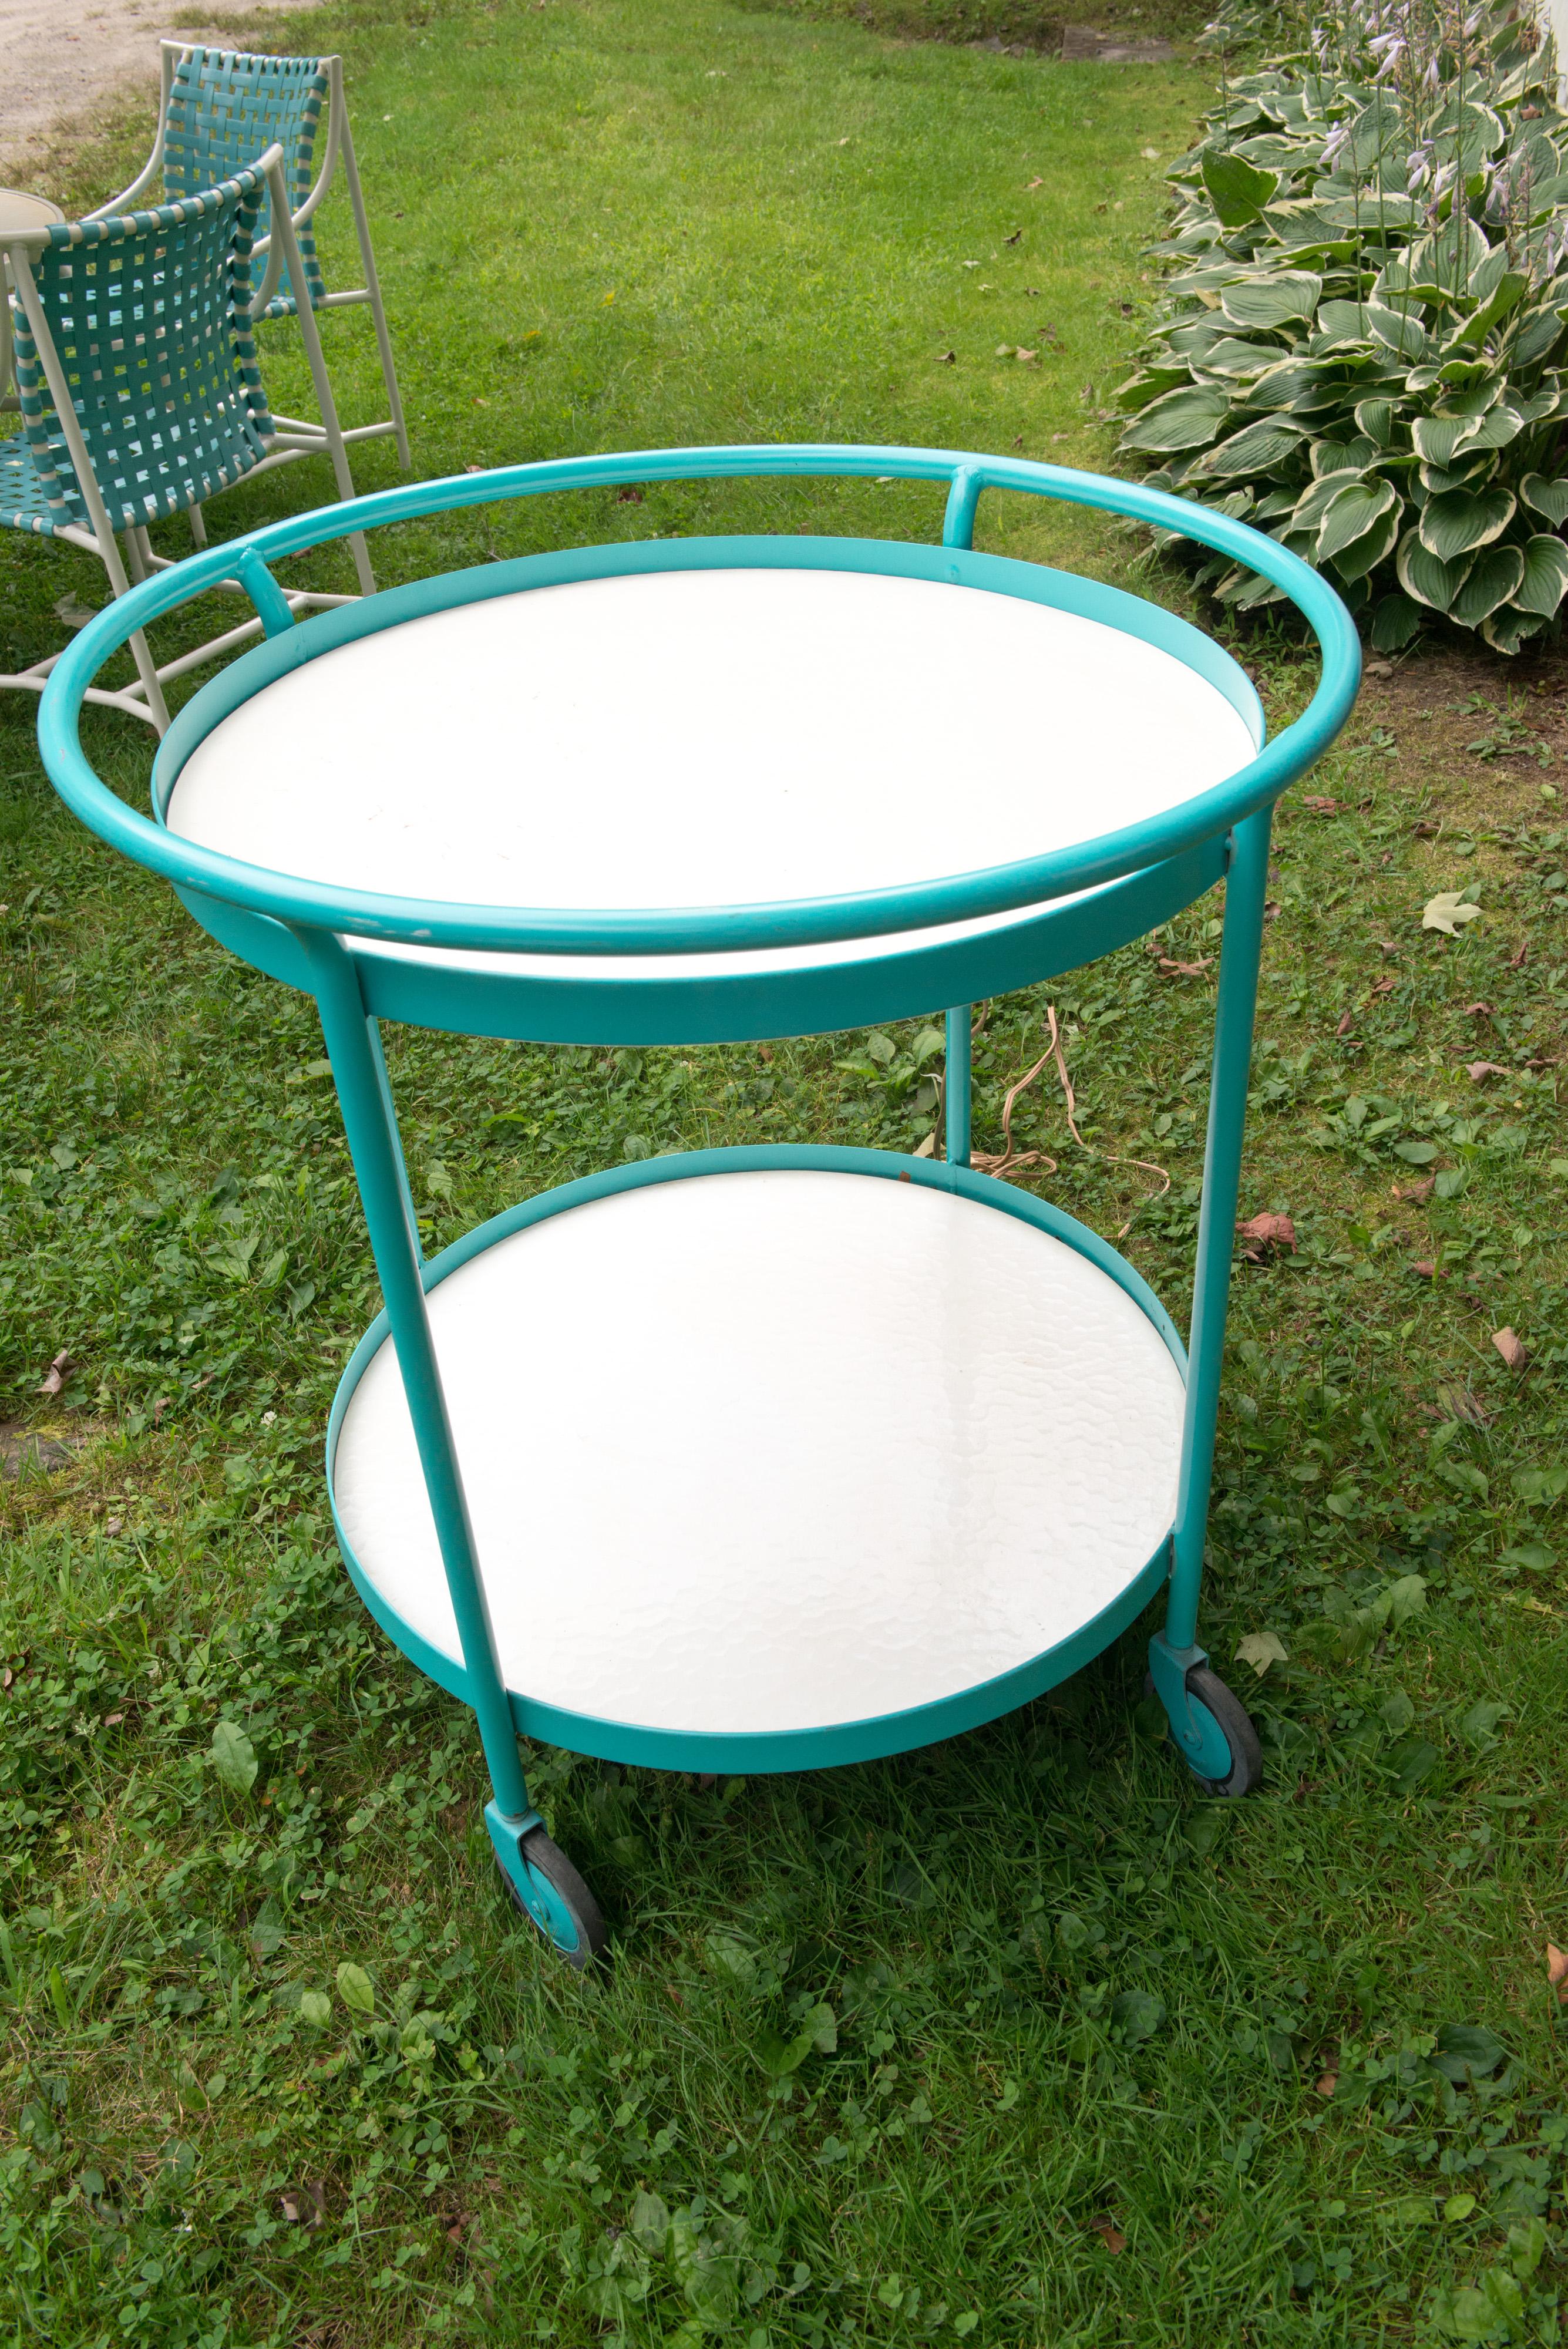 1960s Tropitone turquoise powdered coated aluminum round cart with two white laminate surfaces. Other separately priced pieces to this set: Stunning table & 4 turquoise vinyl webbed chairs with outstanding multi colored canvas umbrella, turquoise